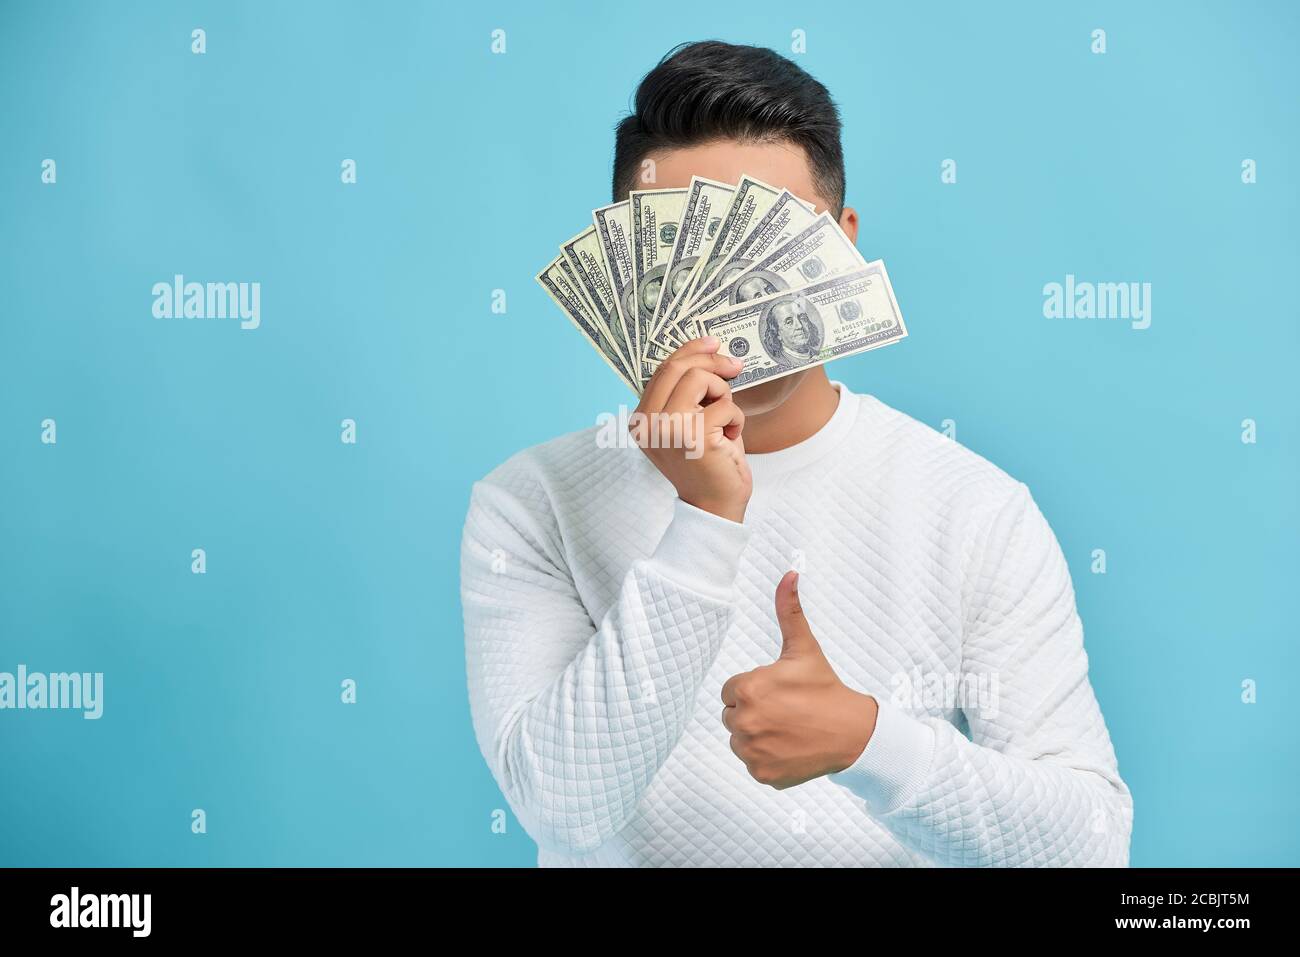 Rich successful businessman holding a wad of cash and giving thumbsup sign. Isolated. Stock Photo